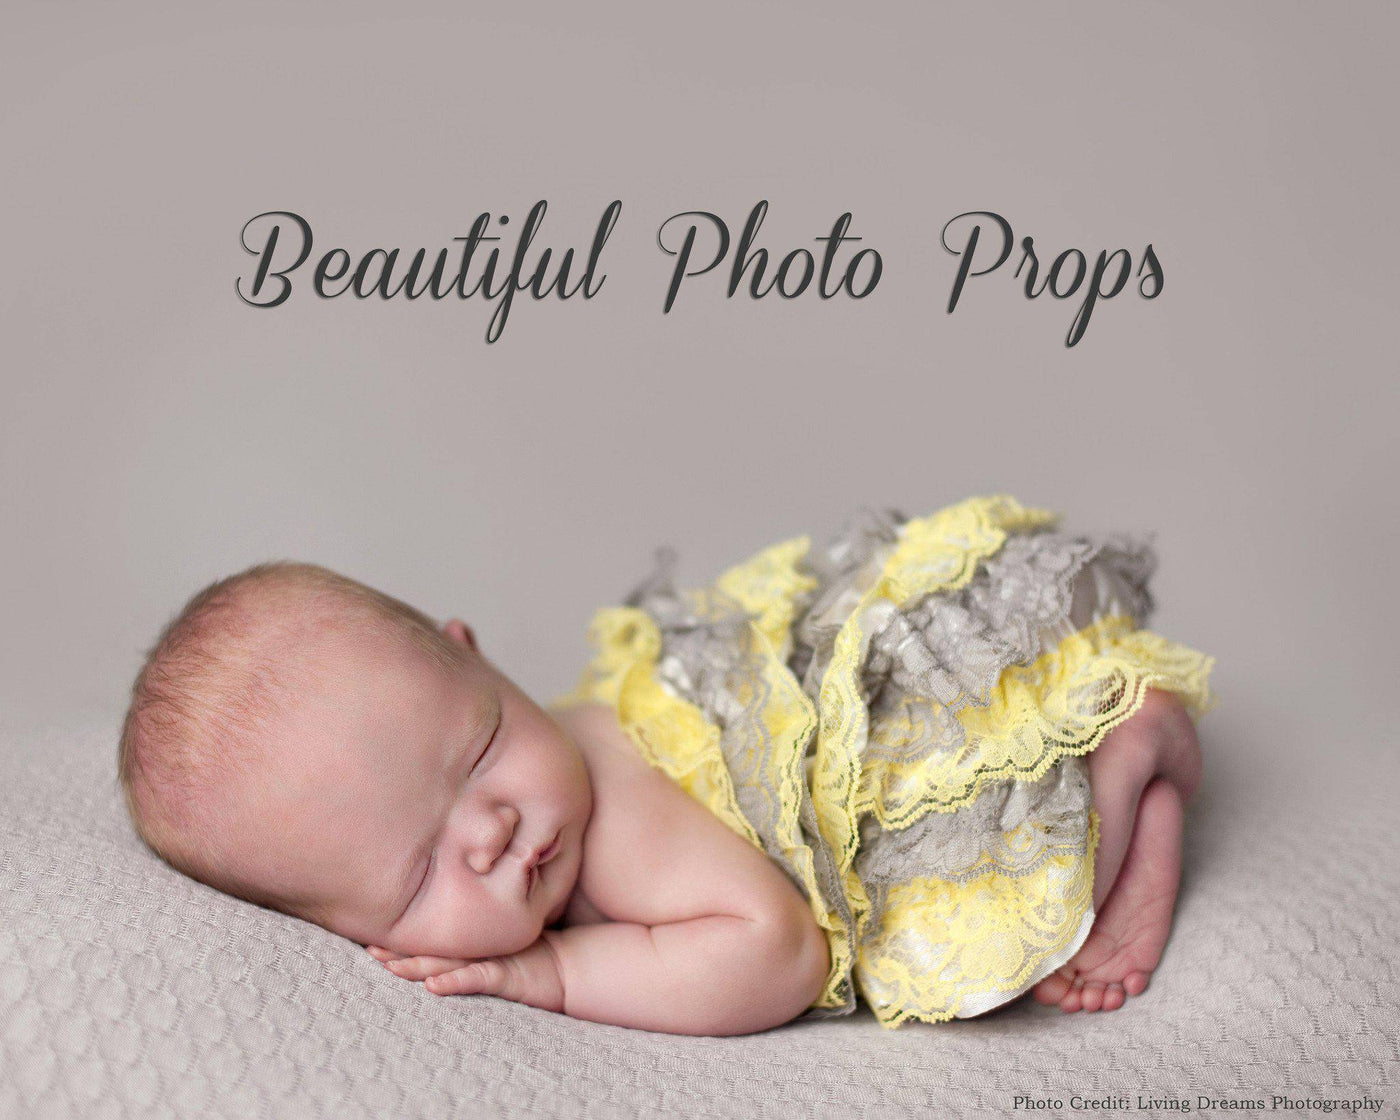 Striped Lace Rompers - 10 Color Combos - Beautiful Photo Props